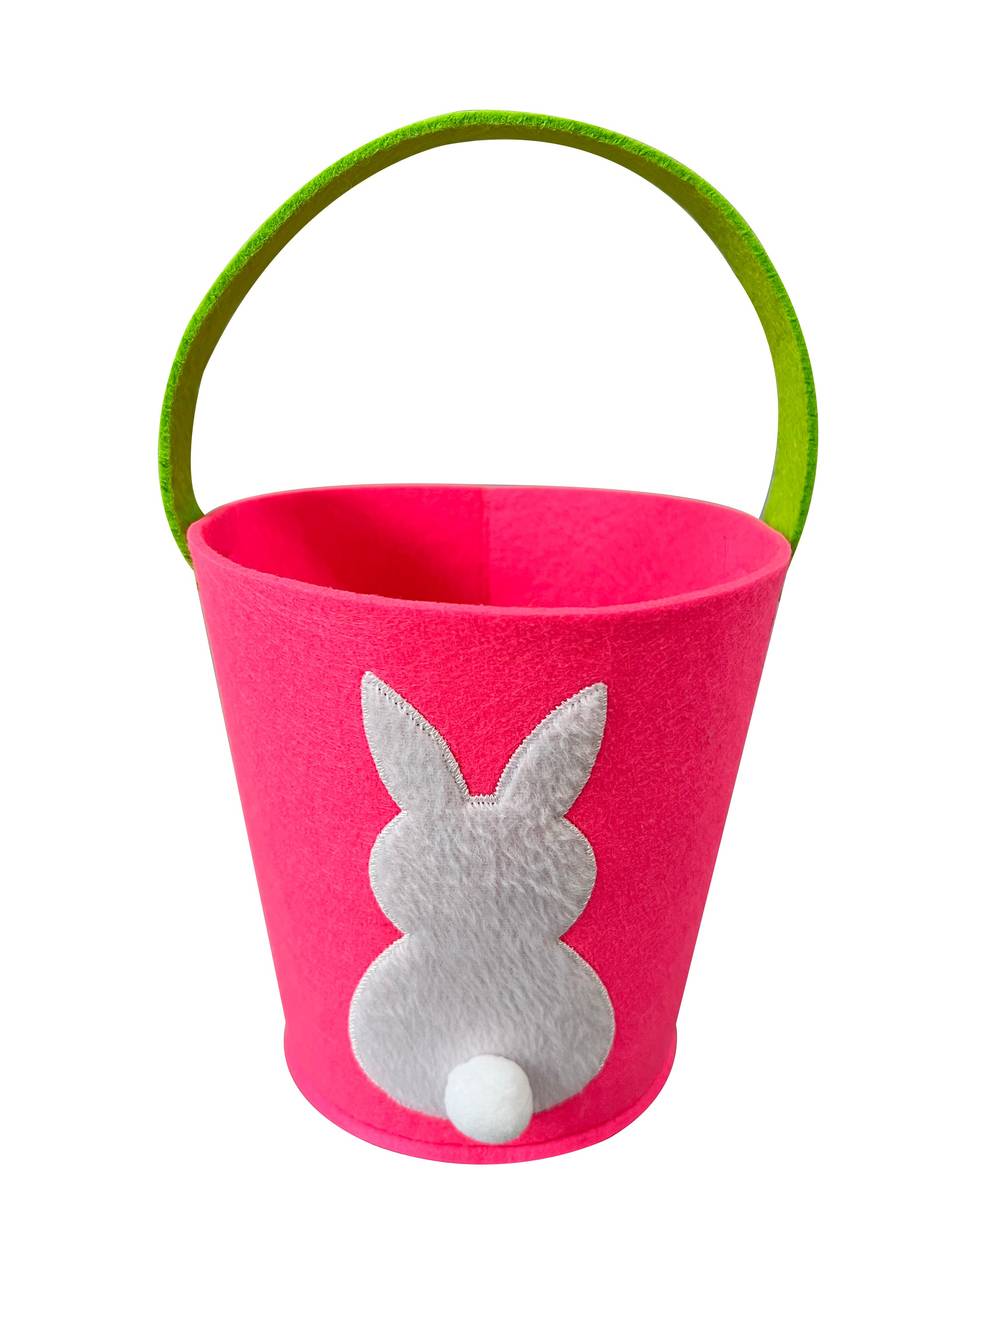 Cottondale Fabric Easter Bunny Basket, Pink